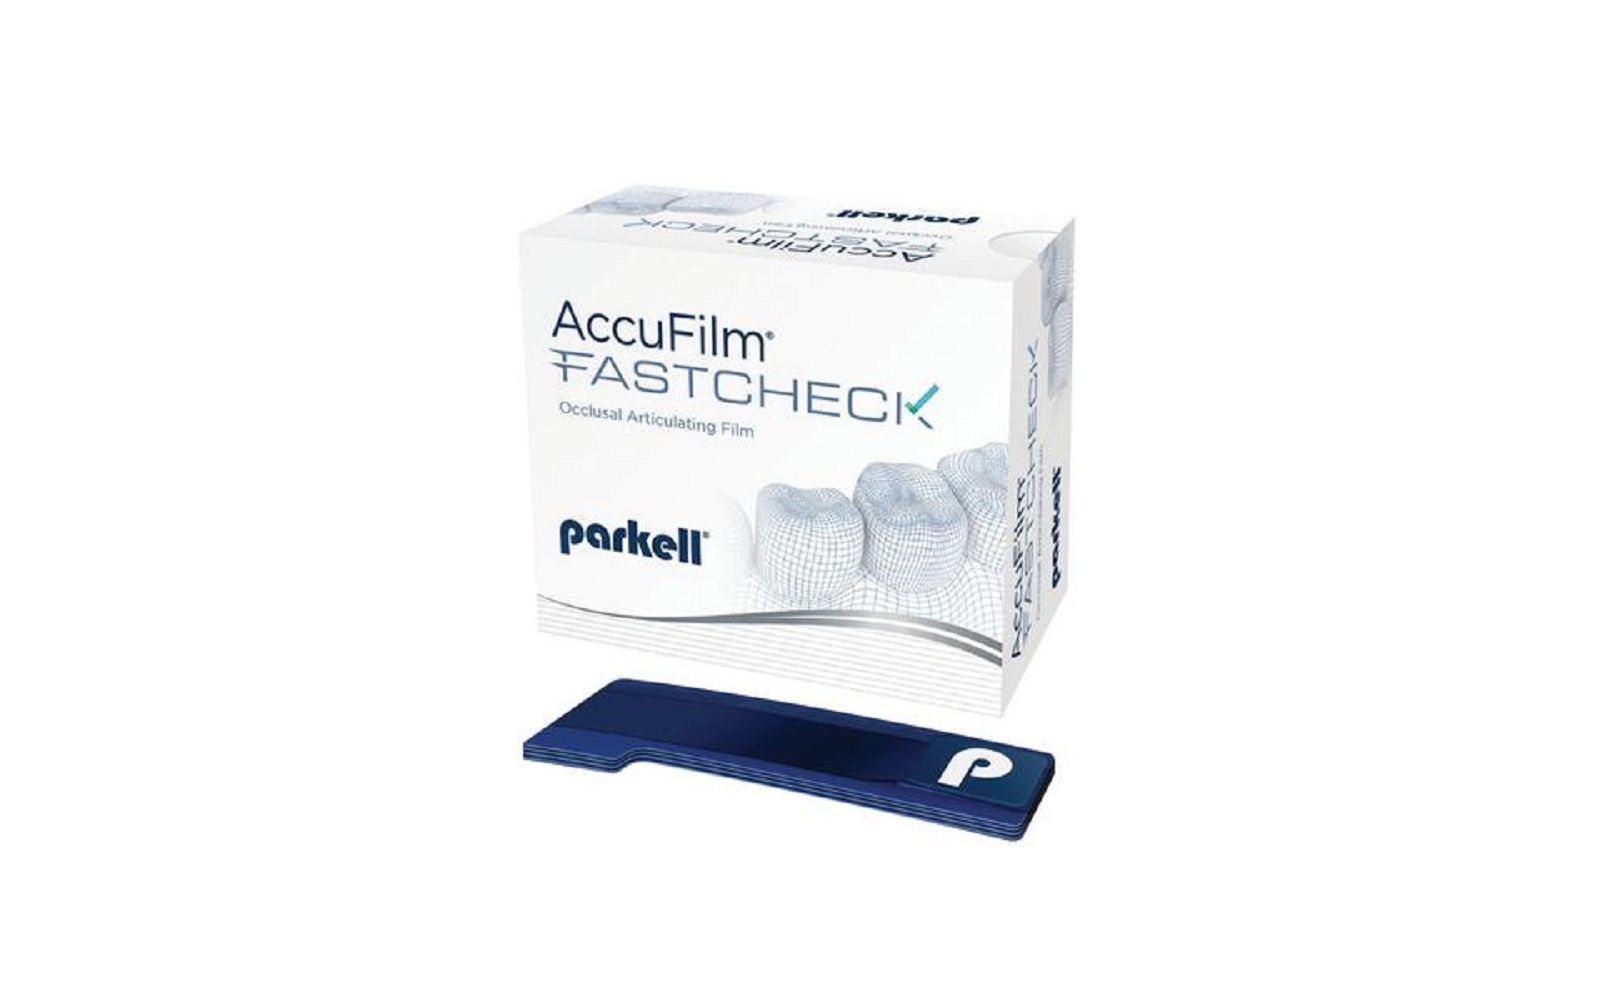 Accufilm® fastcheck double-sided occlusal articulating film strips, 100/pkg